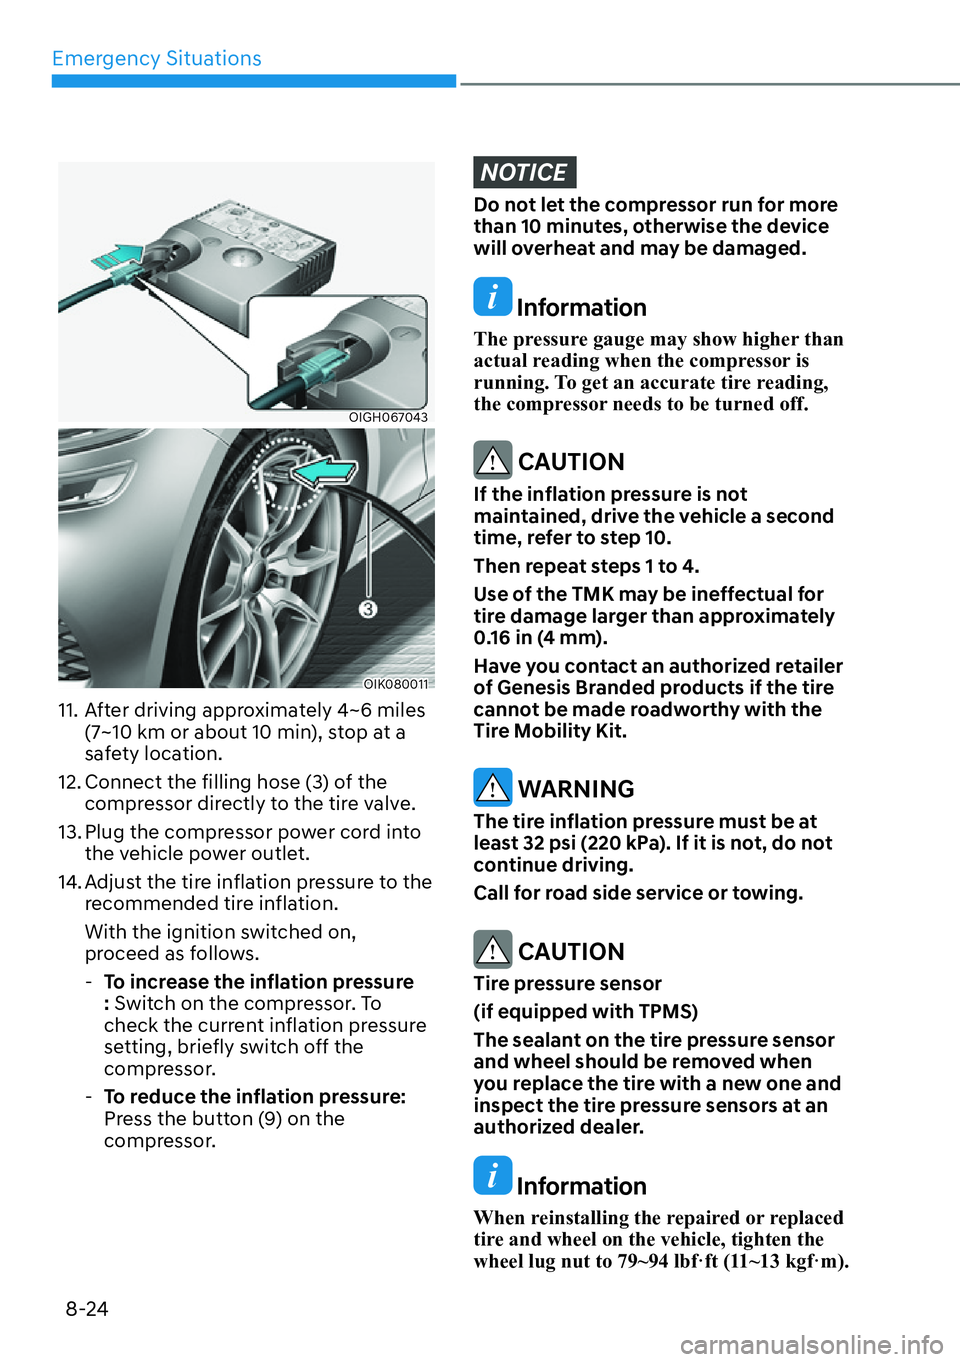 HYUNDAI GENESIS G70 2022  Owners Manual Emergency Situations
8-24
OIGH067043
OIK080011
11. After driving approximately 4~6 miles 
(7~10 km or about 10 min), stop at a 
safety location.
12. Connect the filling hose (3) of the 
compressor dir